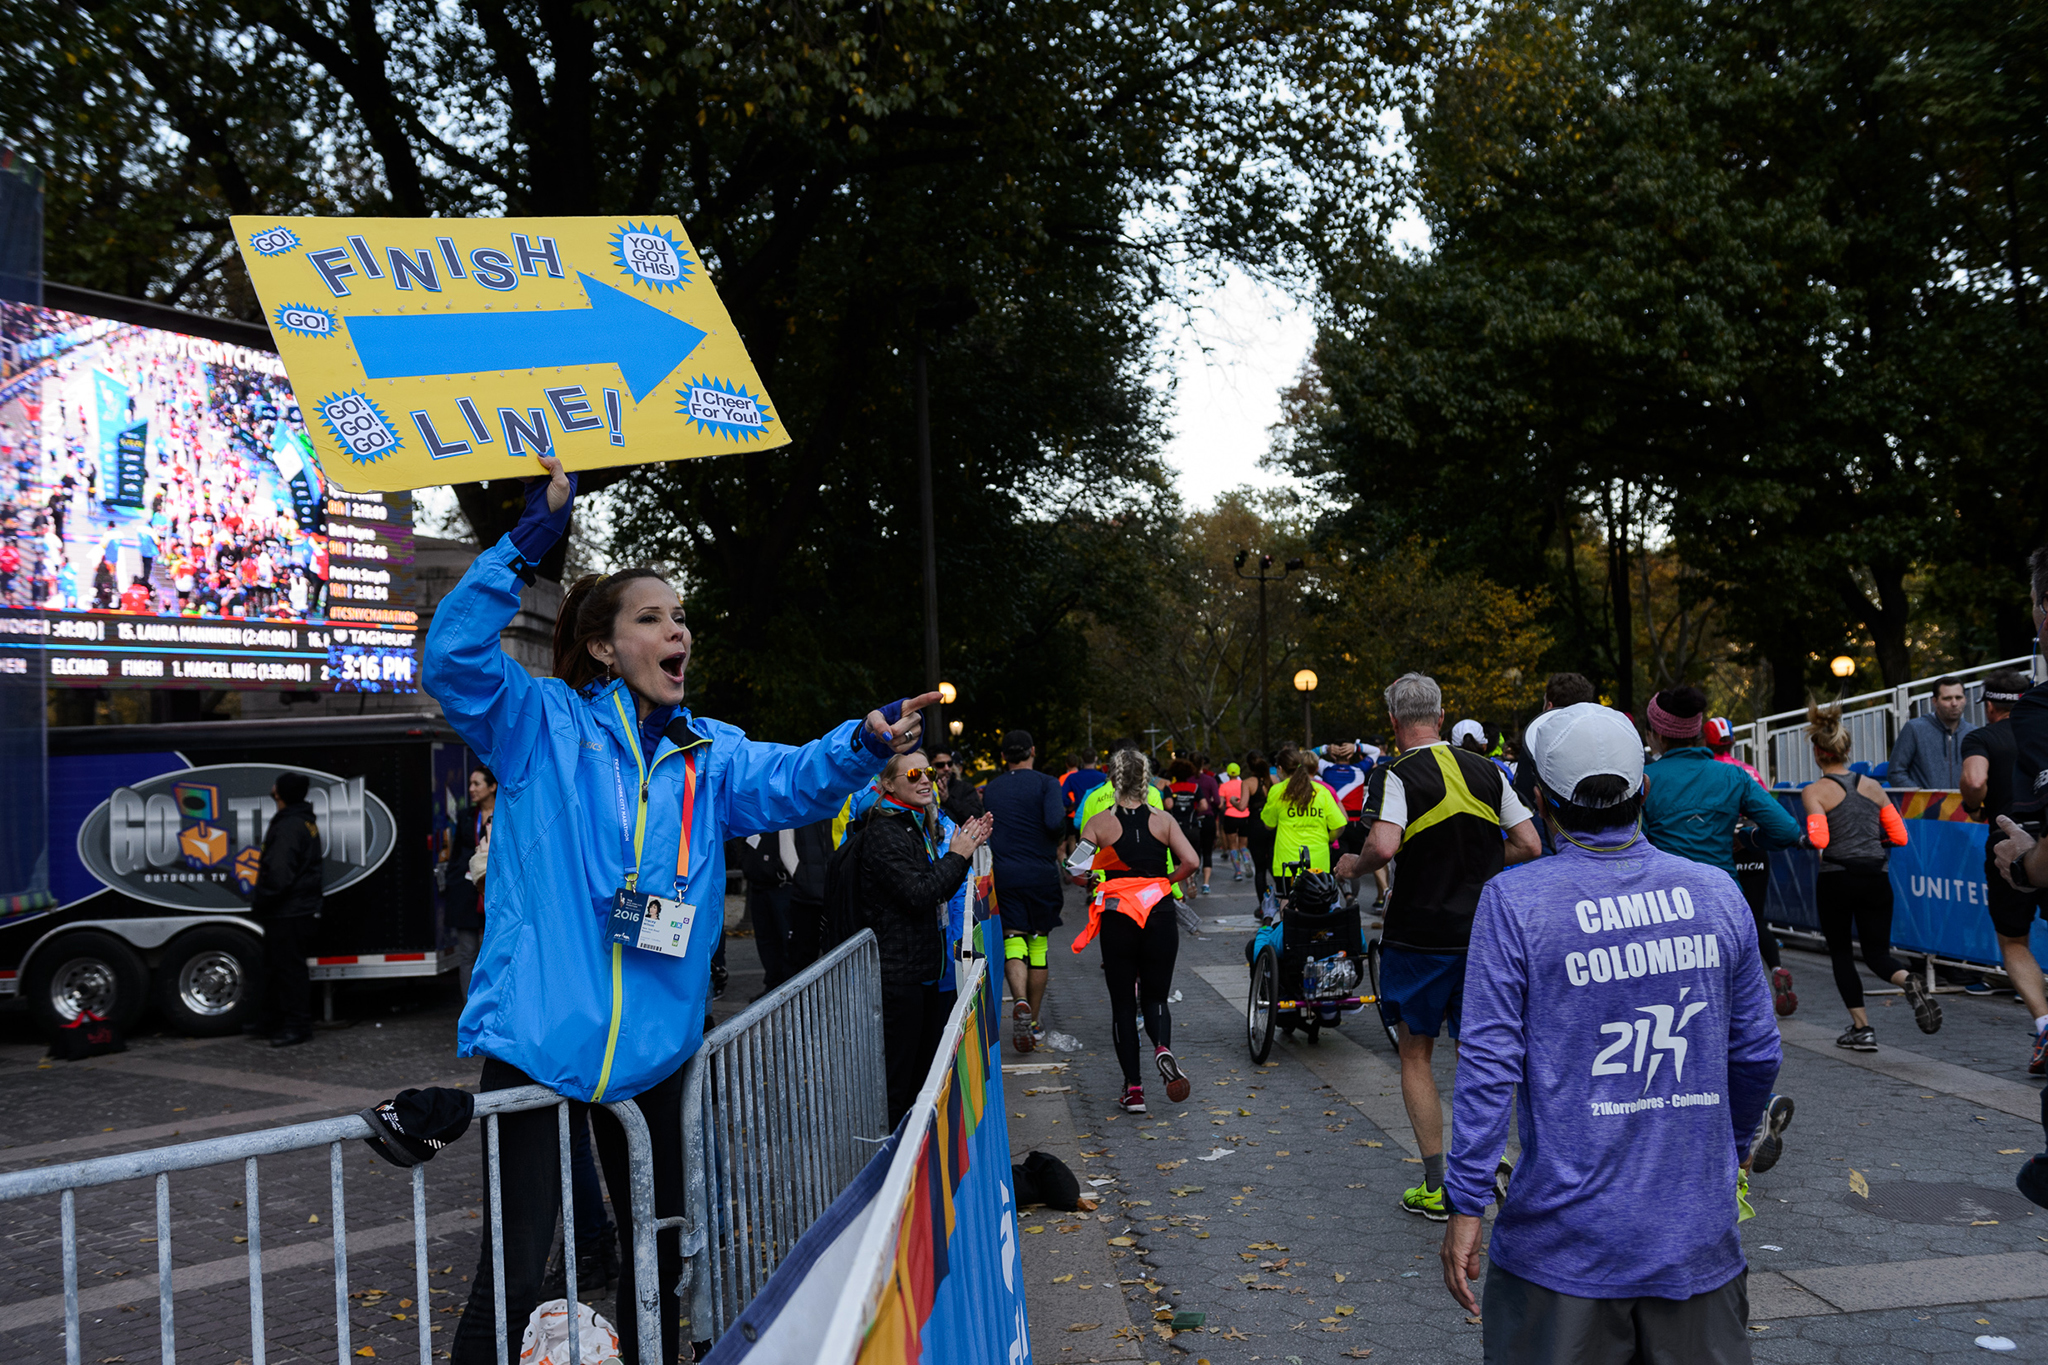 NYC Marathon 2022 Route Including Course Map and Where to Watch